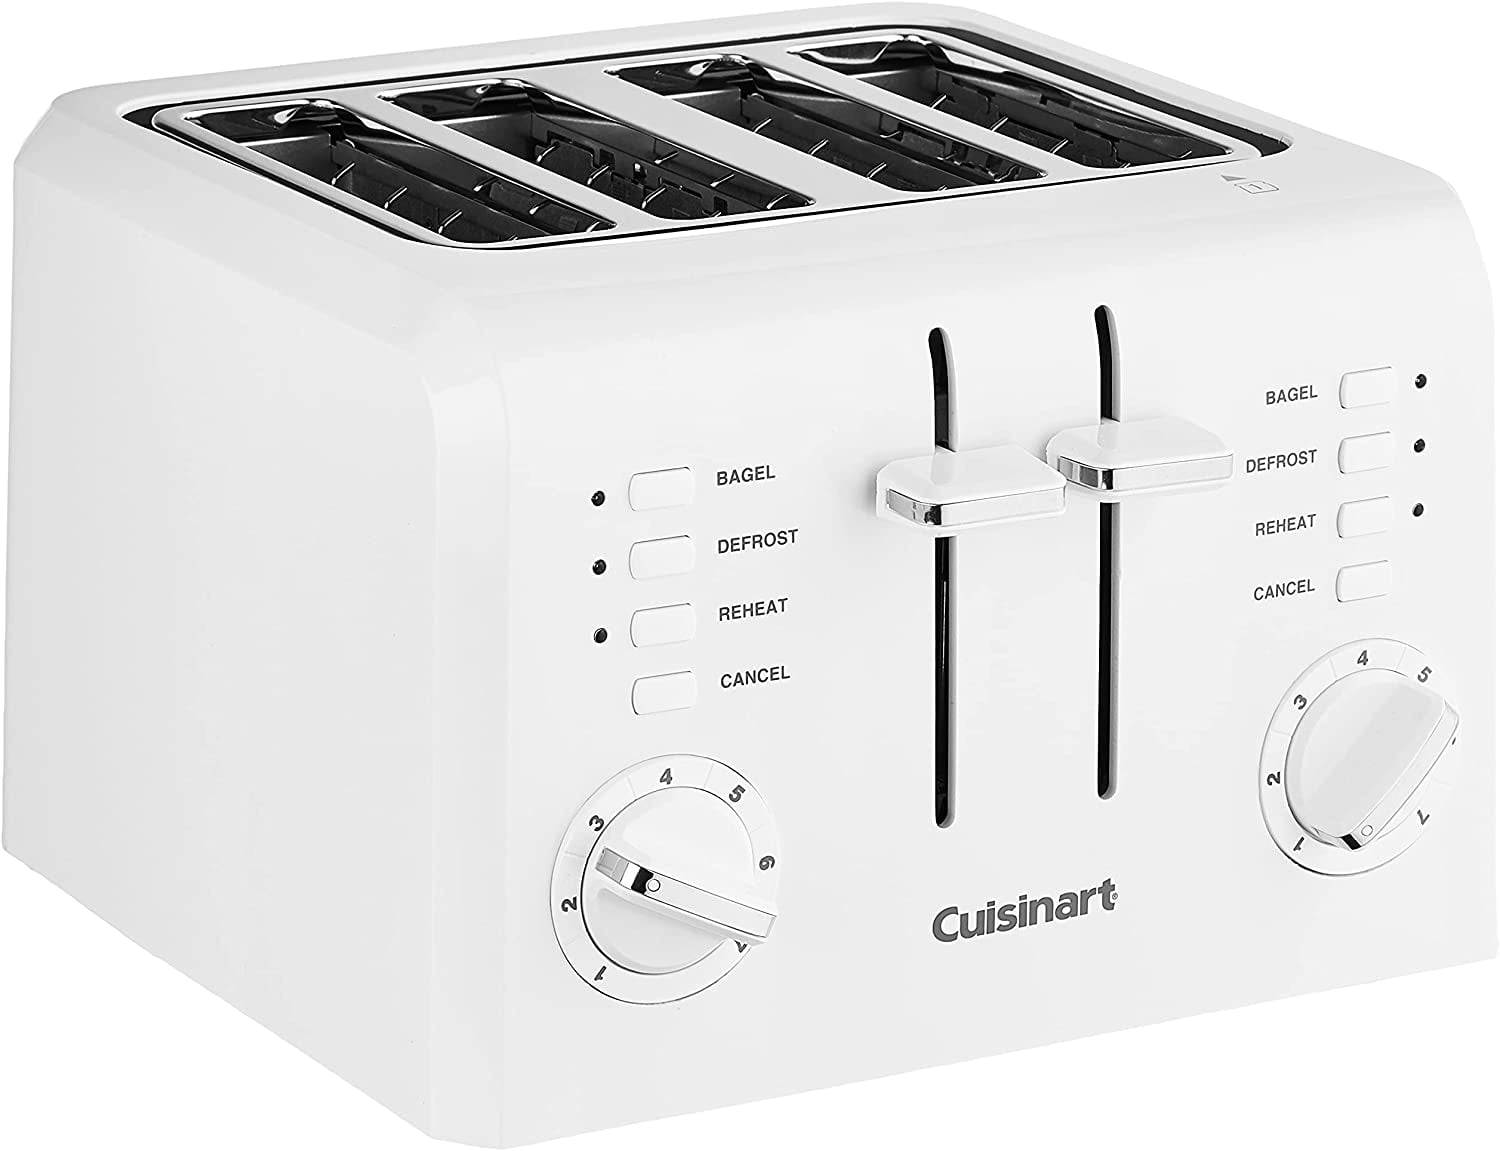 Cuisinart CPT-180WP1 Metal Classic 4-Slice toaster, White 